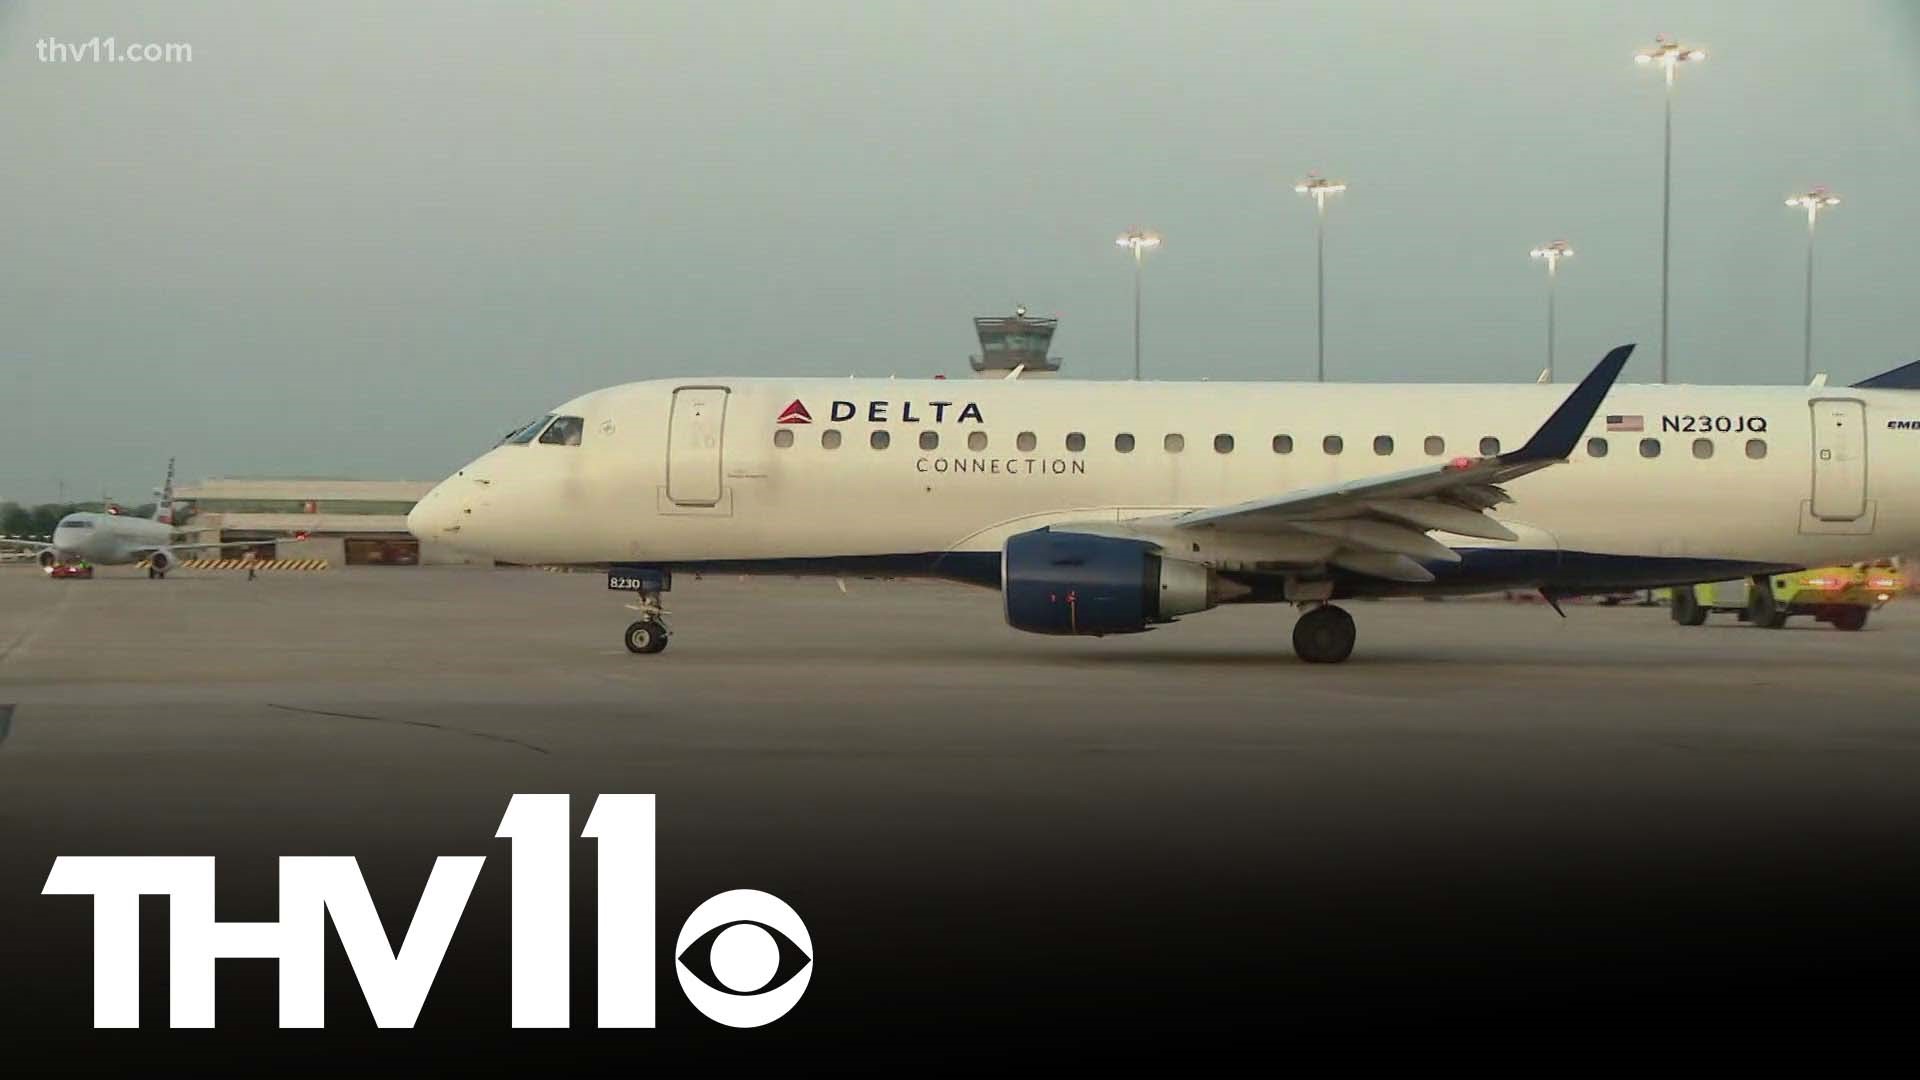 It's an exciting day in Little Rock at the Clinton National Airport as the newest daily flight to New York City officially took off on Tuesday morning.